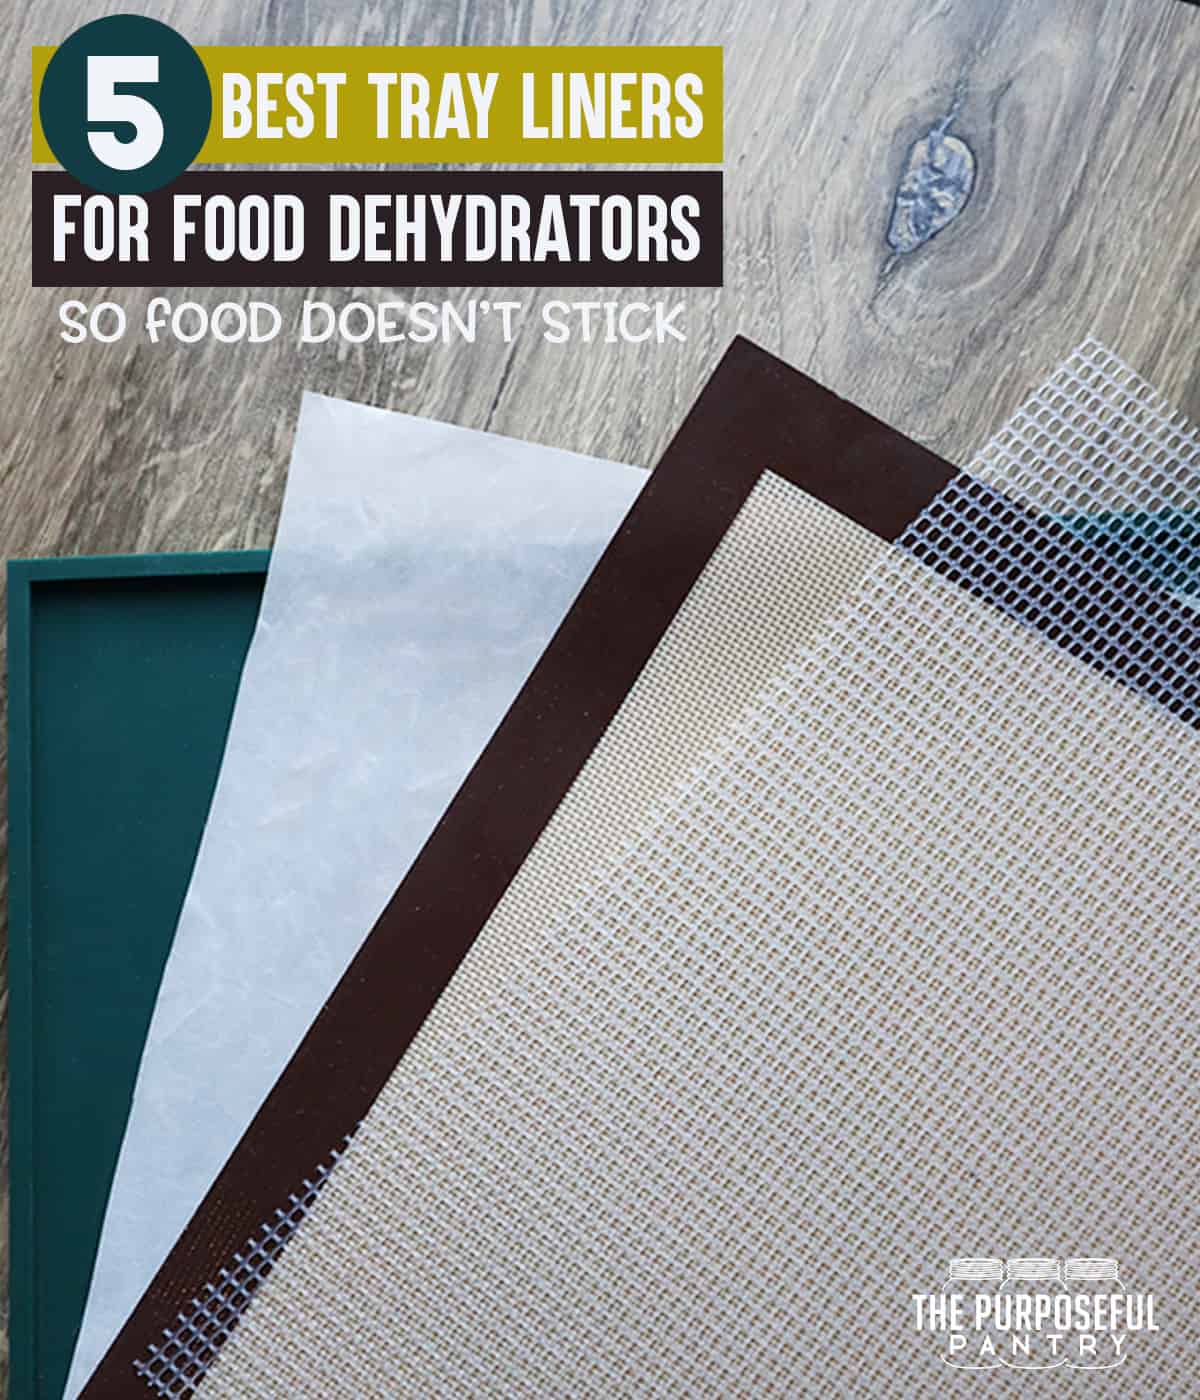 Food Dehydrator Tray Liners: Lipped silicone; teflon; silicone; mesh